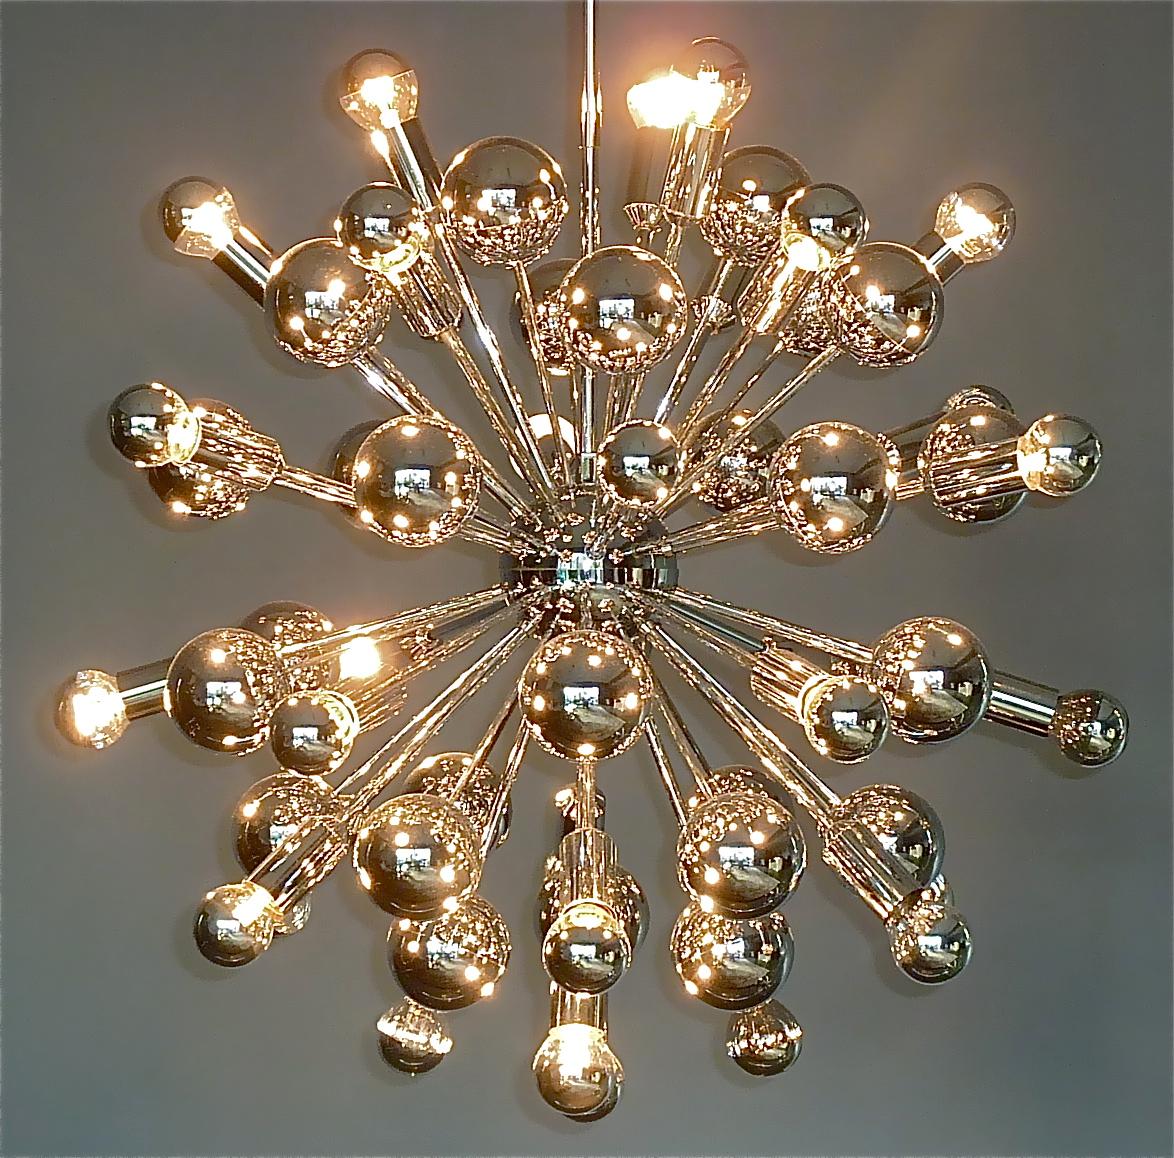 Gorgeous huge 1960s to 1970s chrome brass metal sputnik style light fixture in atomic star burst shape with chrome ball ends and 31 light sockets. The spectacular Italian or German orbit light sculpture in Stilnovo Style is 104 cm / 40.94 inches